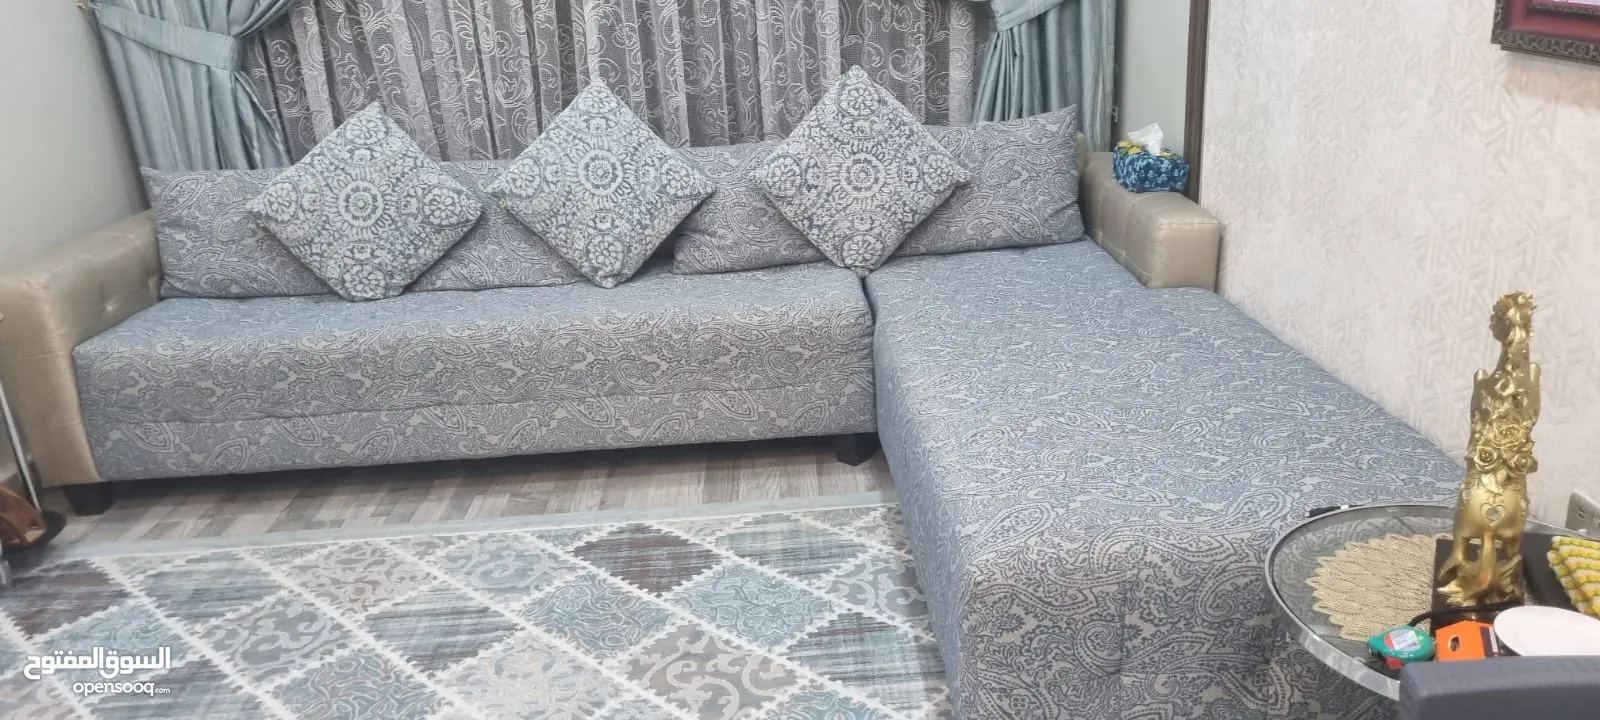 L shaped sofa set from banta on sale